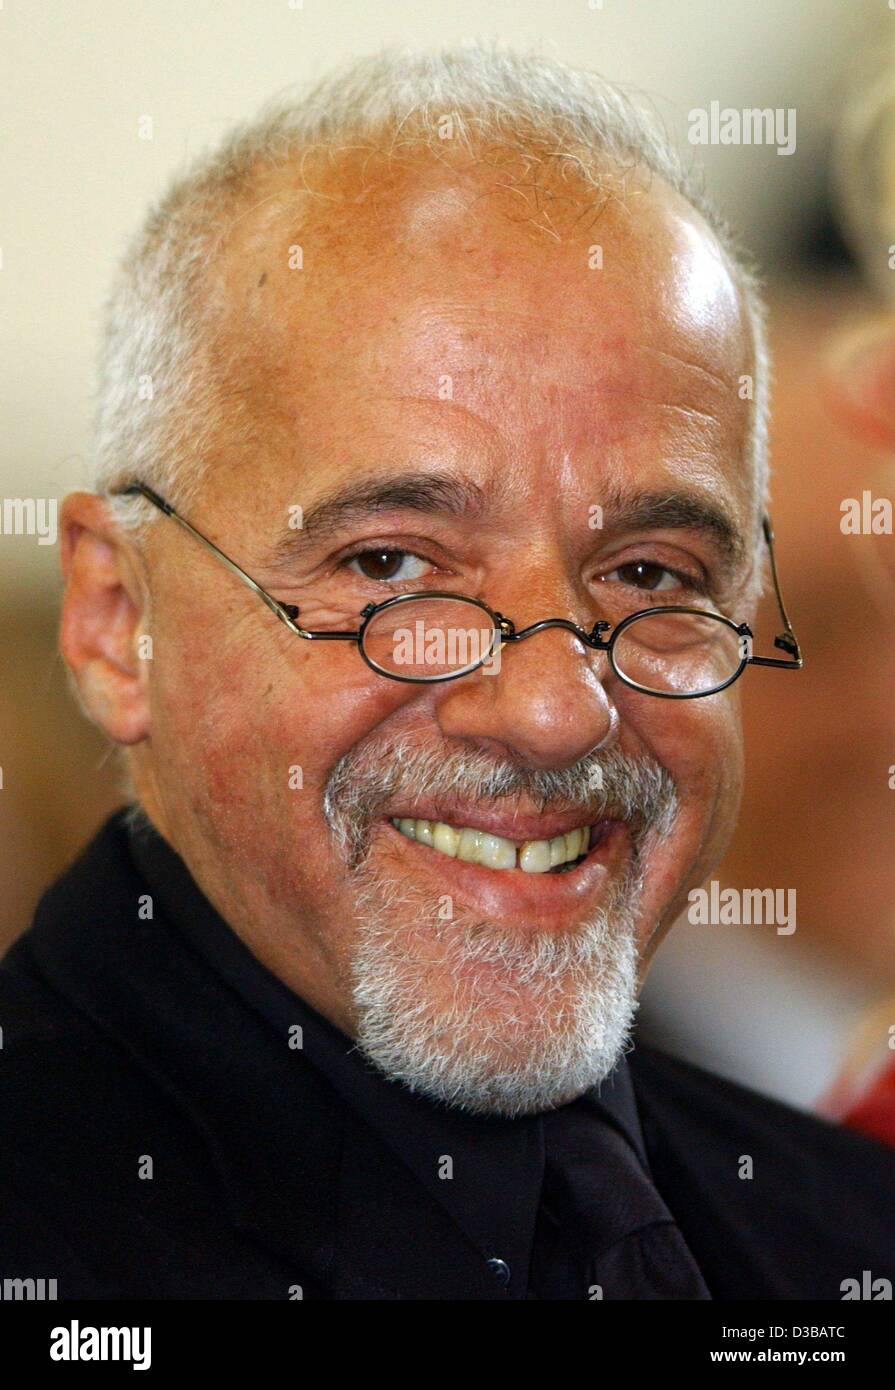 dpa) - Brazilian author Paulo Coelho ('The Alchemist: A Fable About  Following Your Dream'/'El Alquimista: Una Fabula Para Seguir Tus Suenos',  'Veronika Decides to Die') smiles during the ceremony of the Planetary